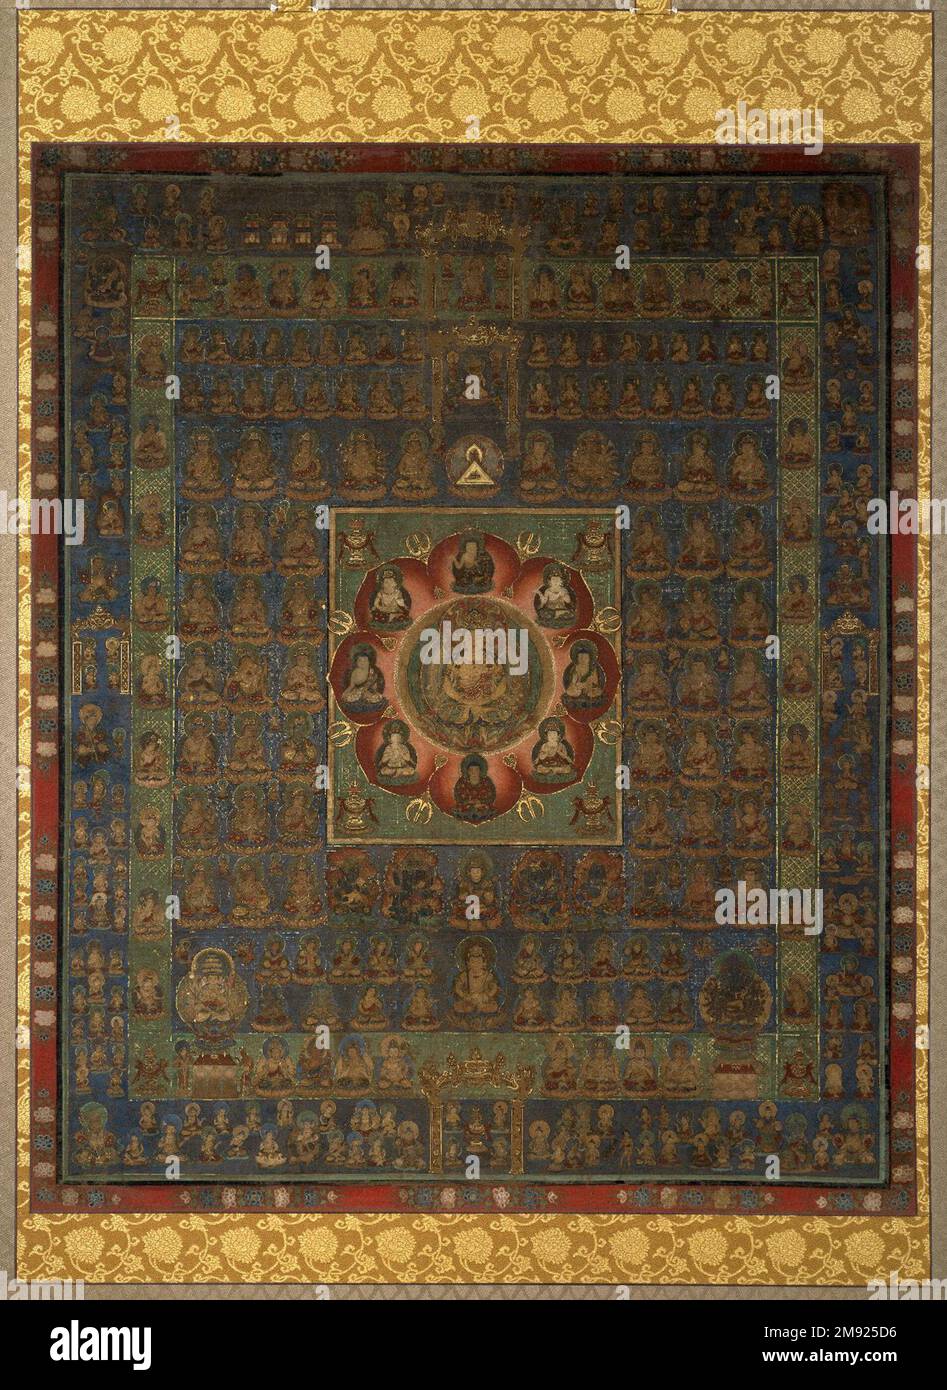 Taizō-kai Mandara Taizō-kai Mandara, 14th century. Opaque watercolor, ink and gold on silk, overall: 84 1/2 x 50 1/8 in. (214.6 x 127.3 cm);.  The mandala (or mandara, in Japanese) is a diagrammatic tool used by Buddhists to guide their meditation and prayer. Most mandalas direct the viewer to travel mentally on a prescribed path, stopping to contemplate and address each figure depicted. This early Womb World (Taizō-kai) mandala is part of a pair that would have been displayed on opposite walls of a temple of Vajrayana (esoteric) Buddhism, representing different but equally viable approaches t Stock Photo